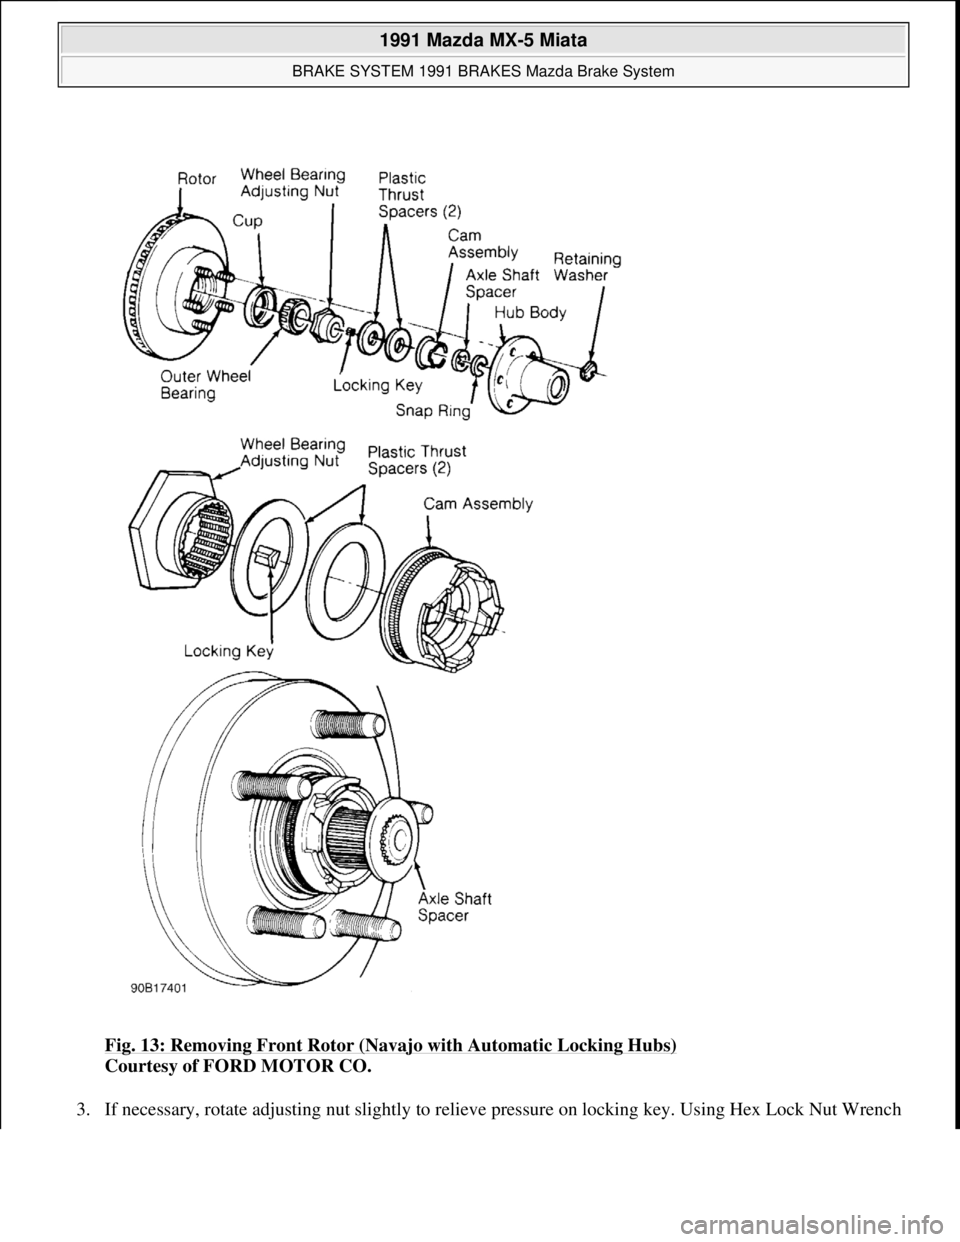 MAZDA MIATA 1991  Factory Service Manual Fig. 13: Removing Front Rotor (Navajo with Automatic Locking Hubs) 
Courtesy of FORD MOTOR CO. 
3. If necessar
y, rotate adjusting nut slightly to relieve pressure on locking key. Using Hex Lock Nut W